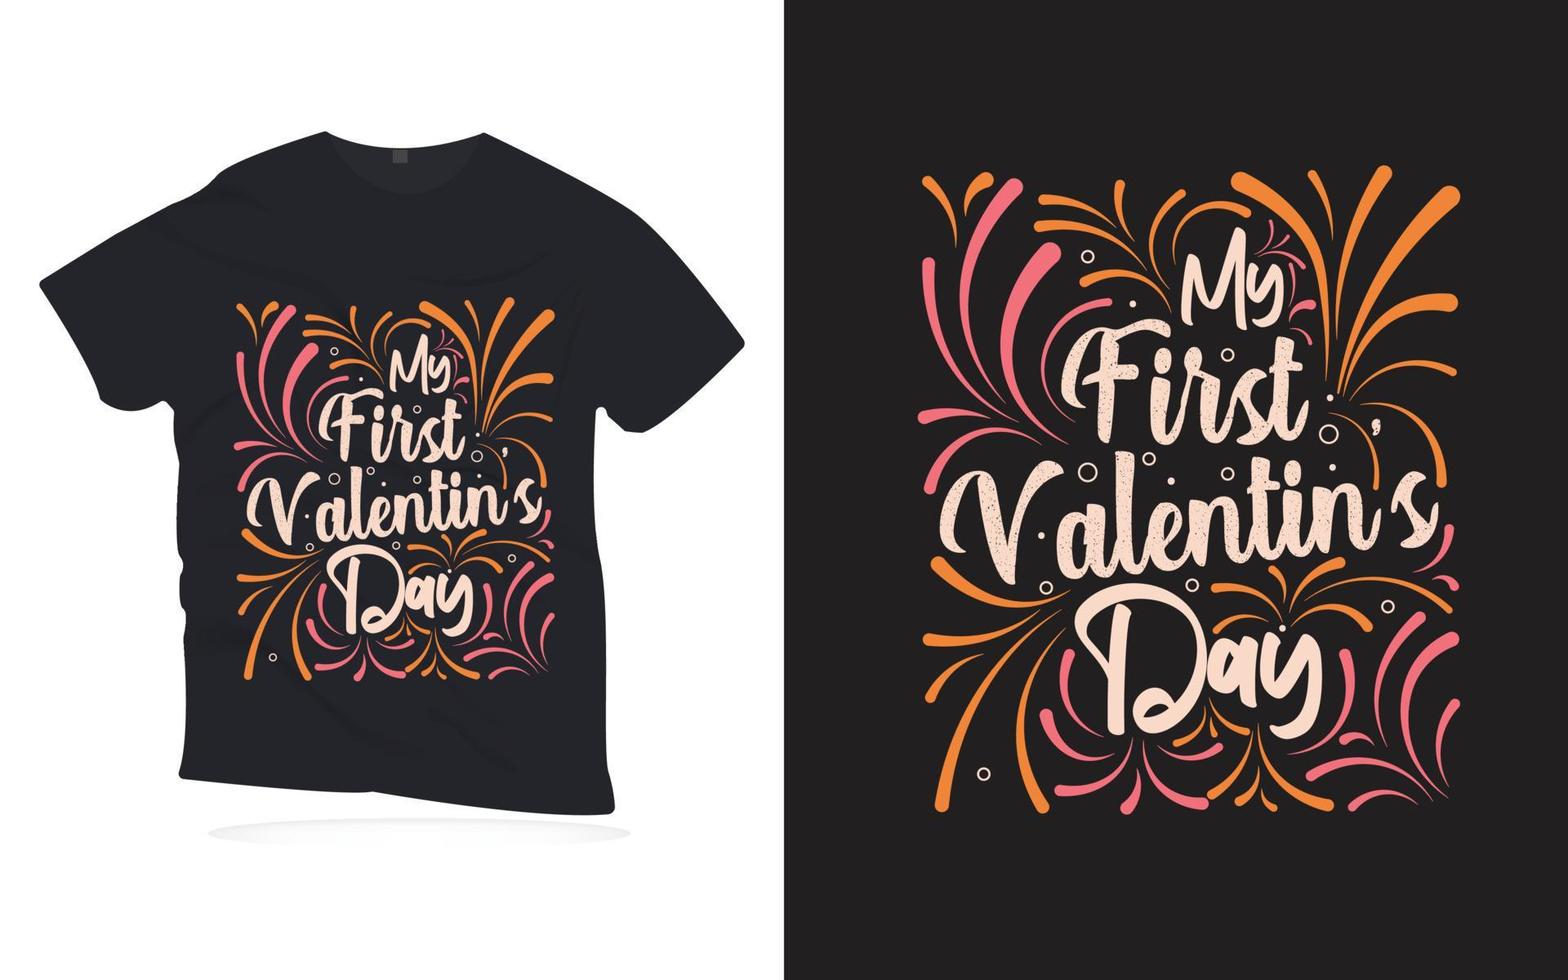 my first valentine's day. Motivational Quotes lettering t-shirt design. vector